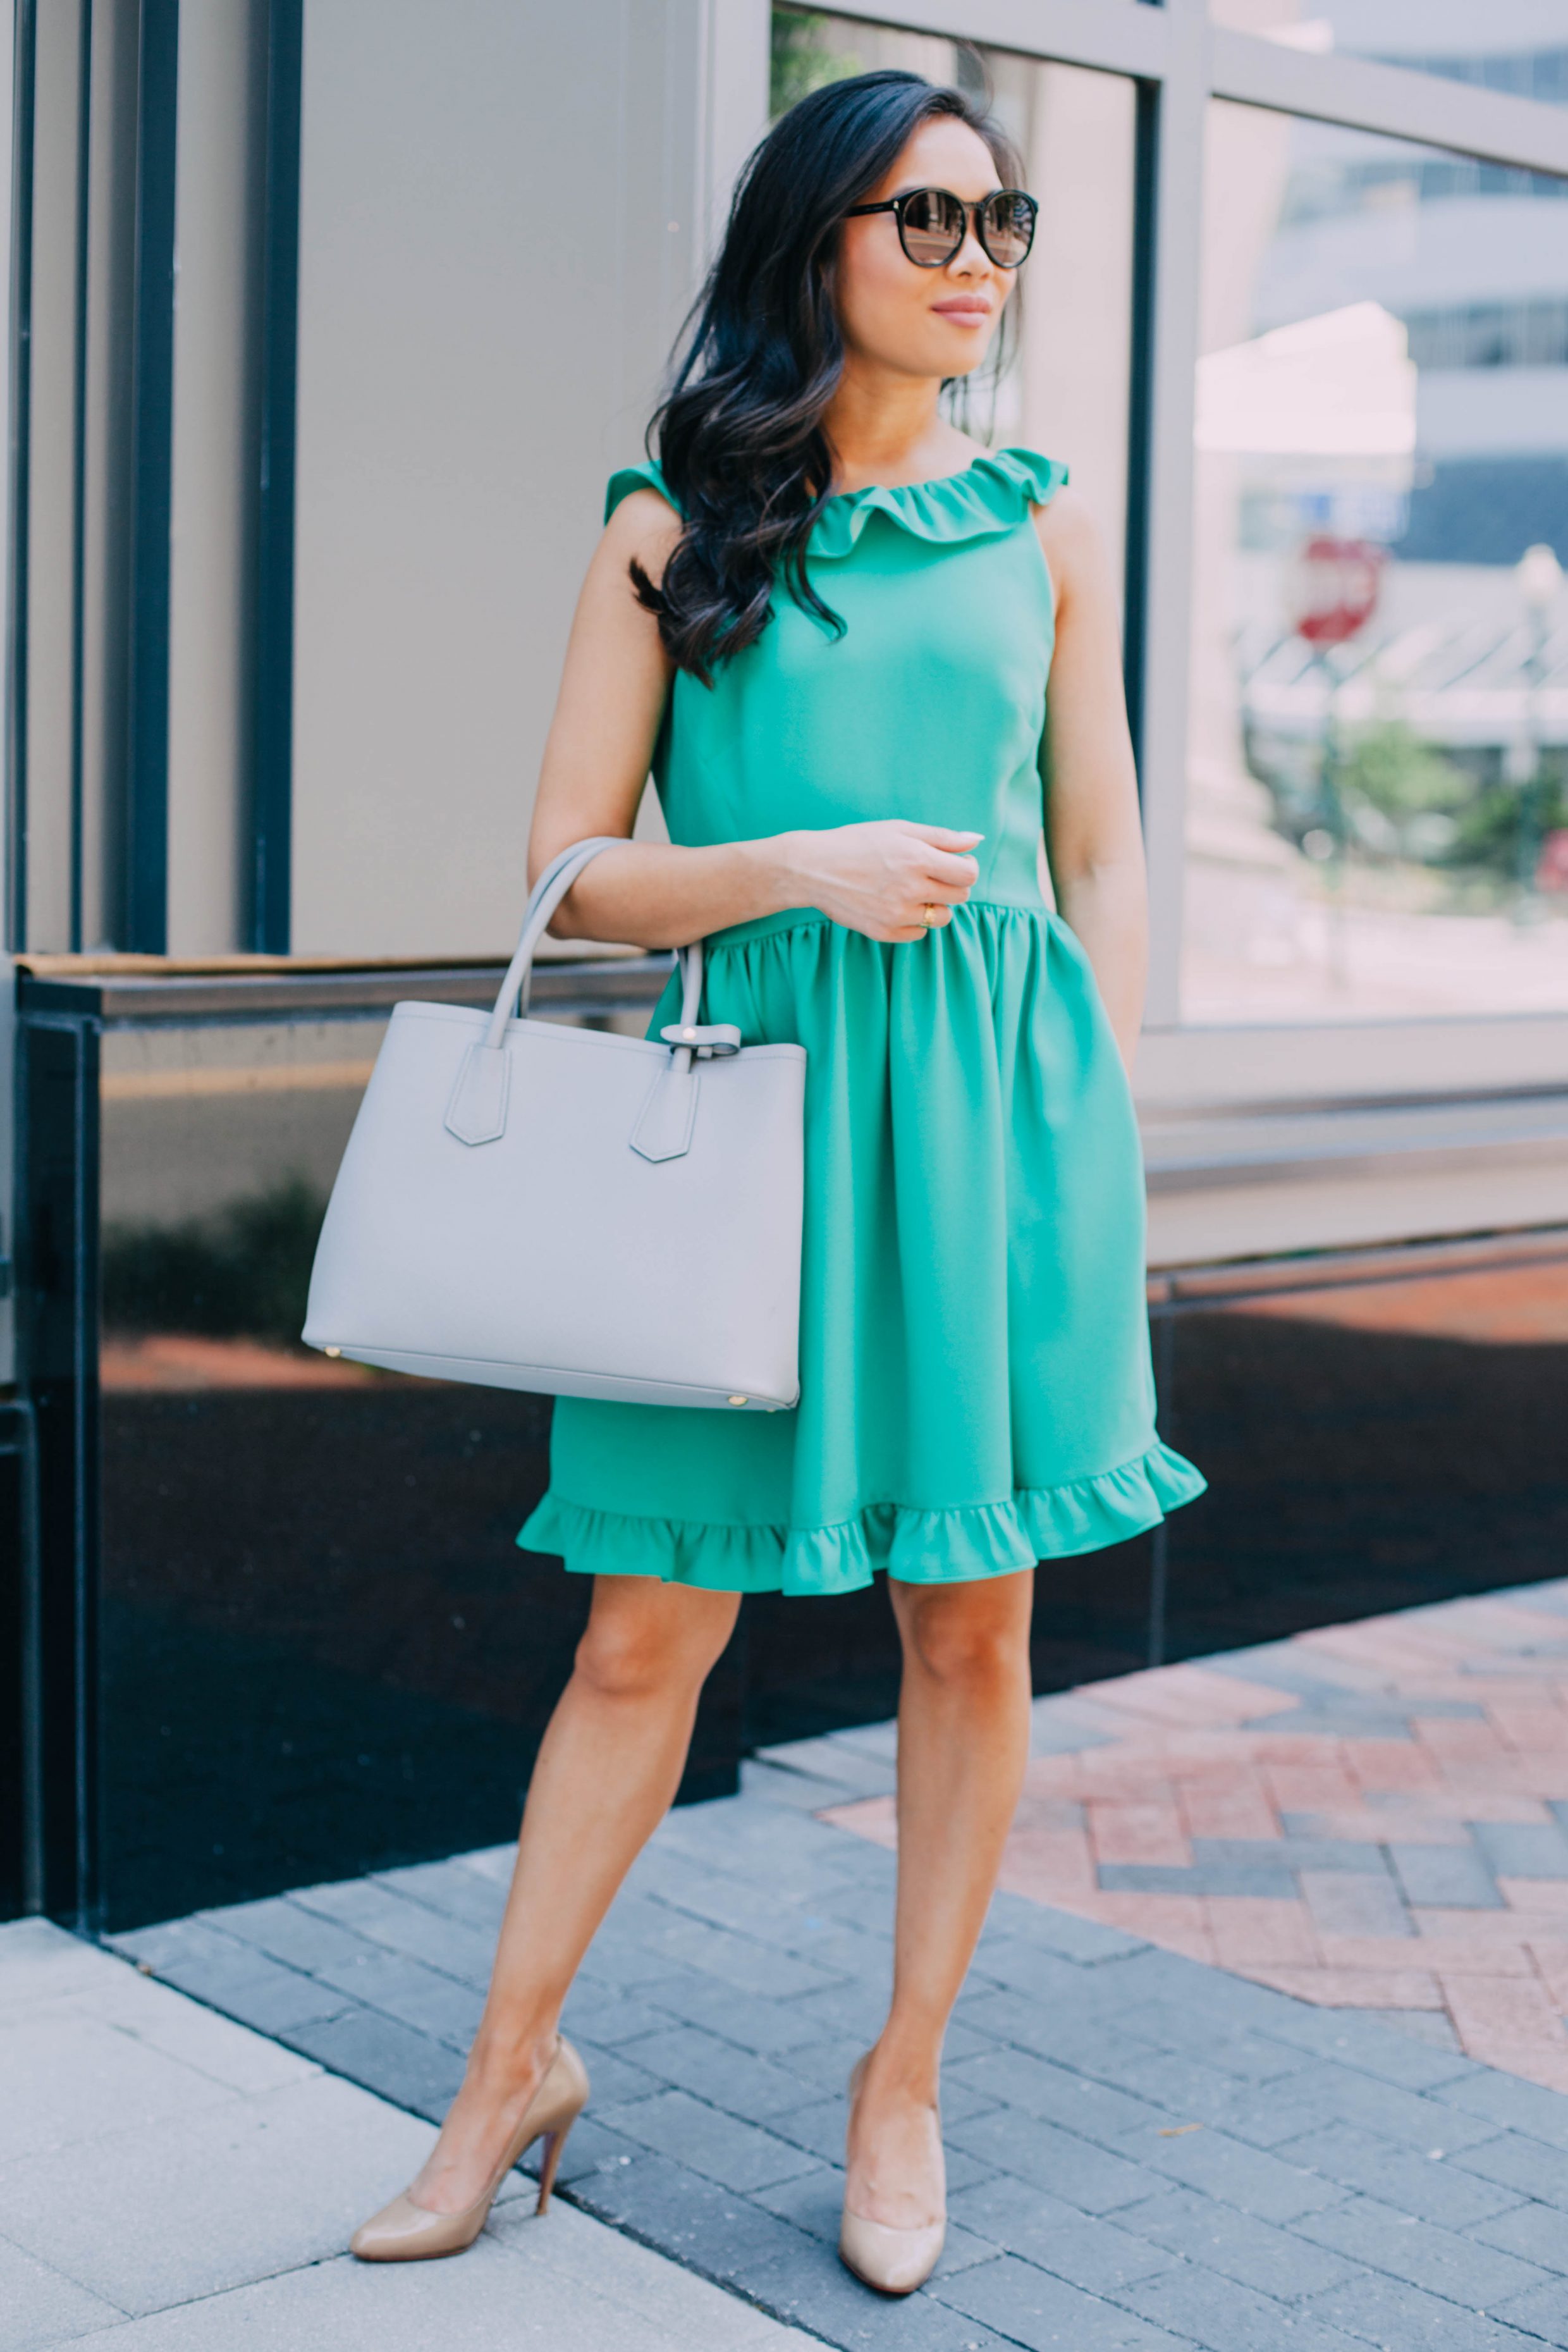 COLOR & CHIC | Ruffle Back Dress with Pockets for Work and the Weekend